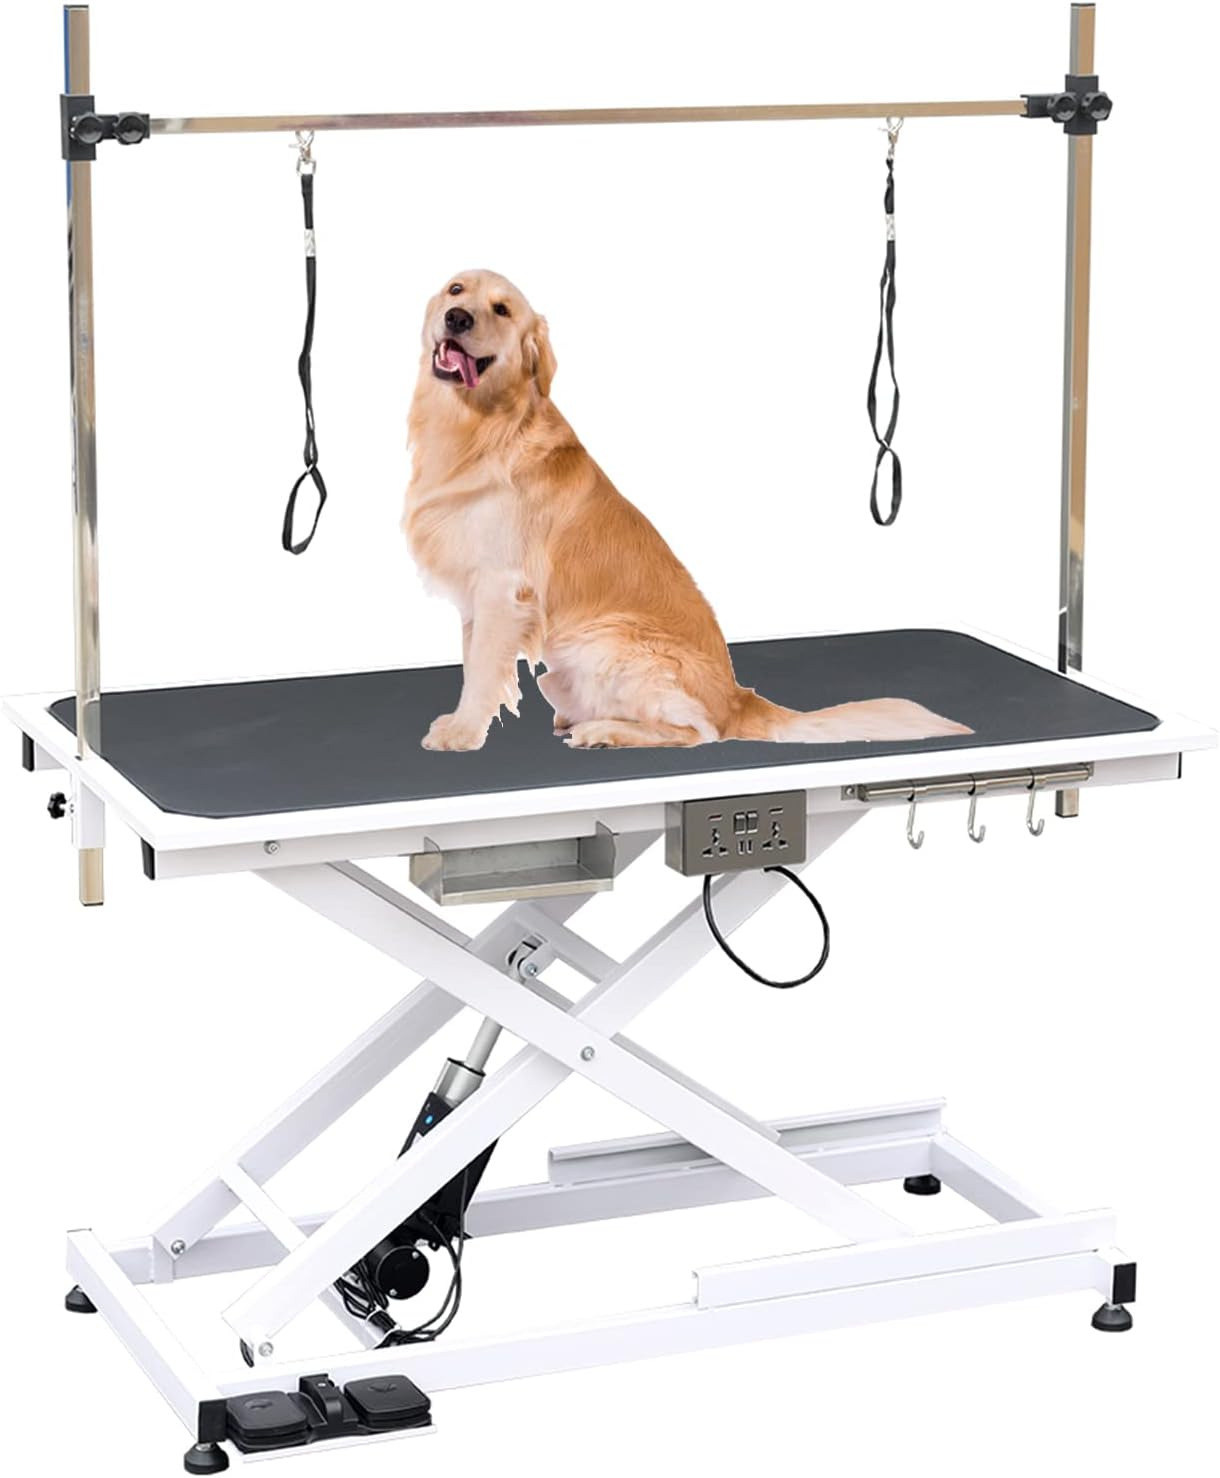 Afqxf Electric Lift Pet Grooming Table, Heavy Duty Professional X-Type Electric 